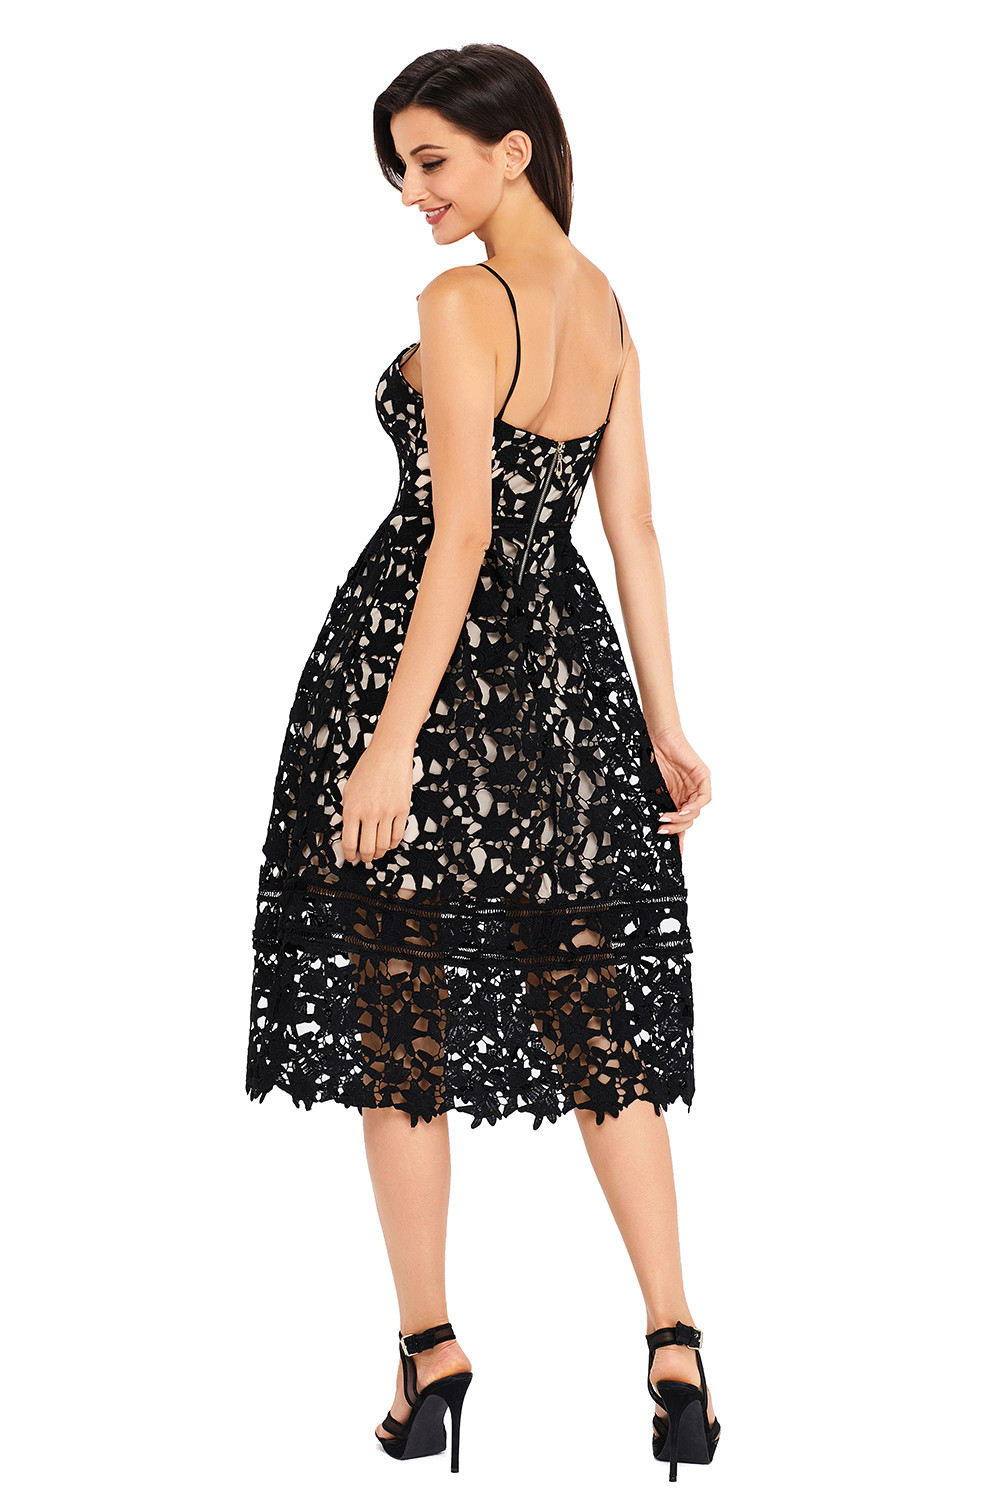 Women In Black Lace Hollow Out Nude Illusion Party Dress